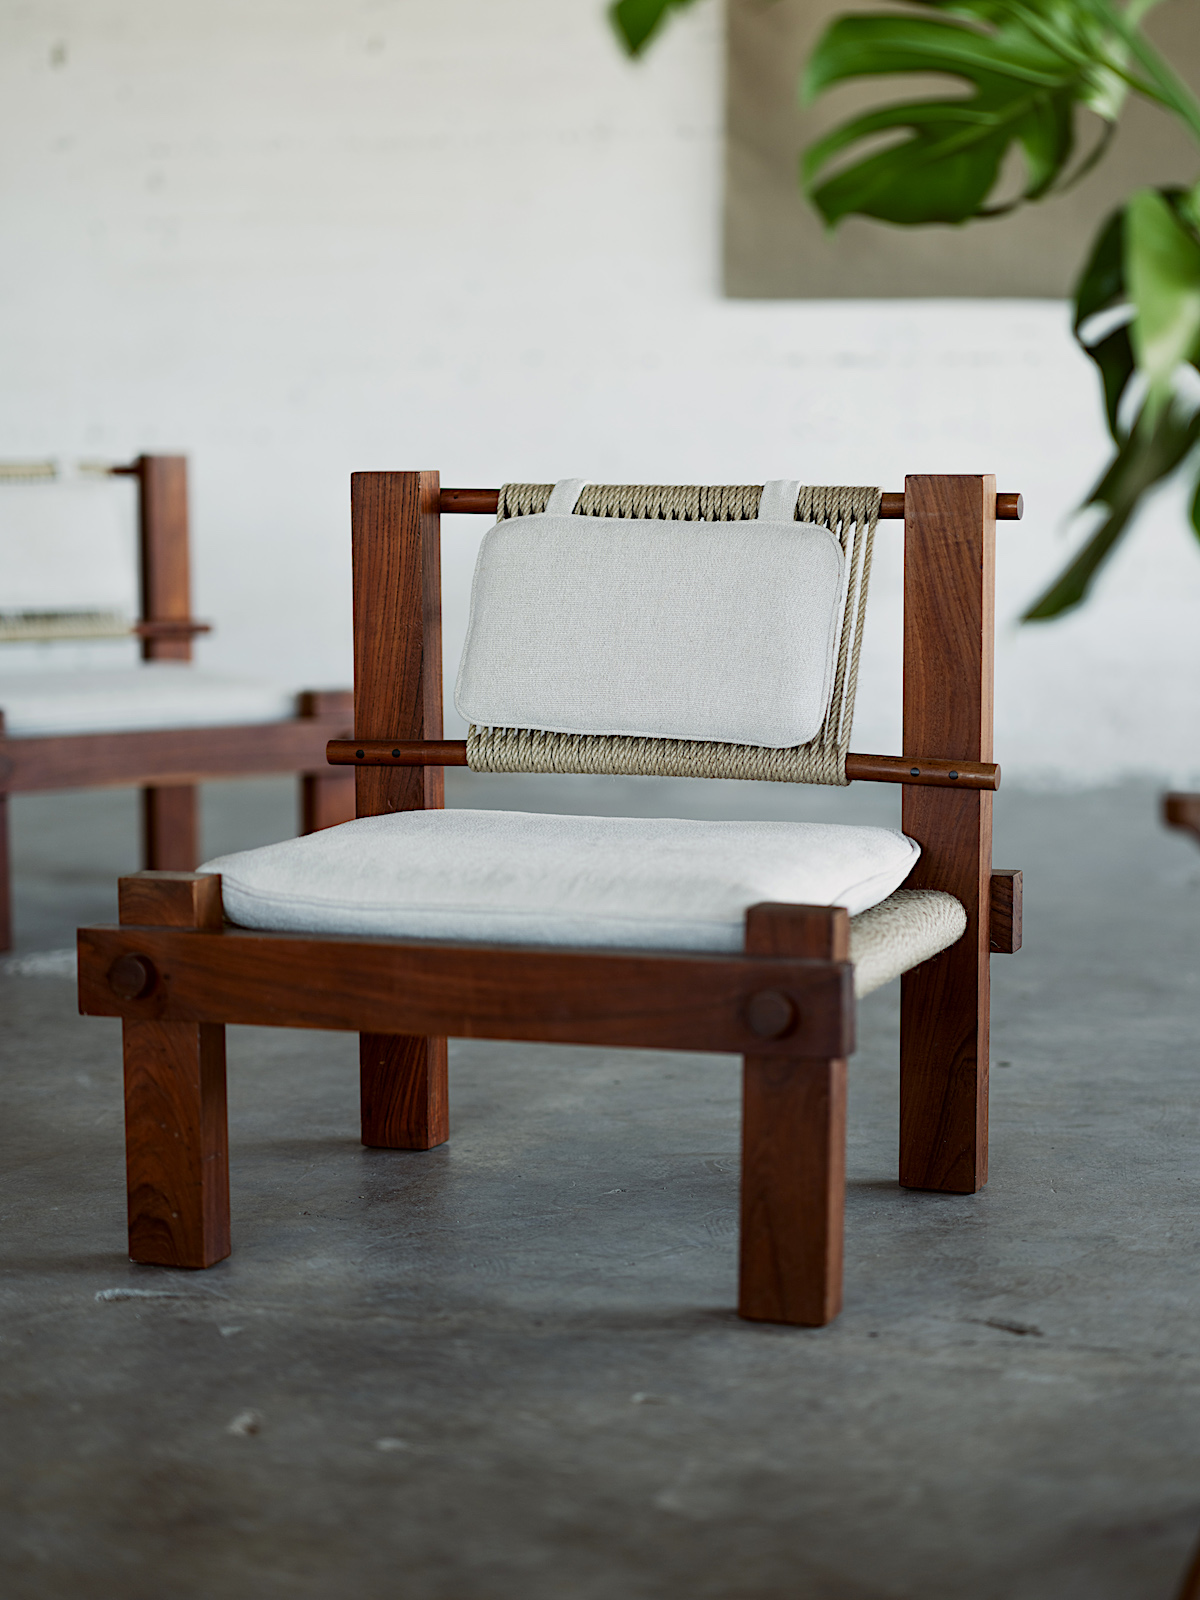 A Lounge Chair by Mini Boga for Taaru